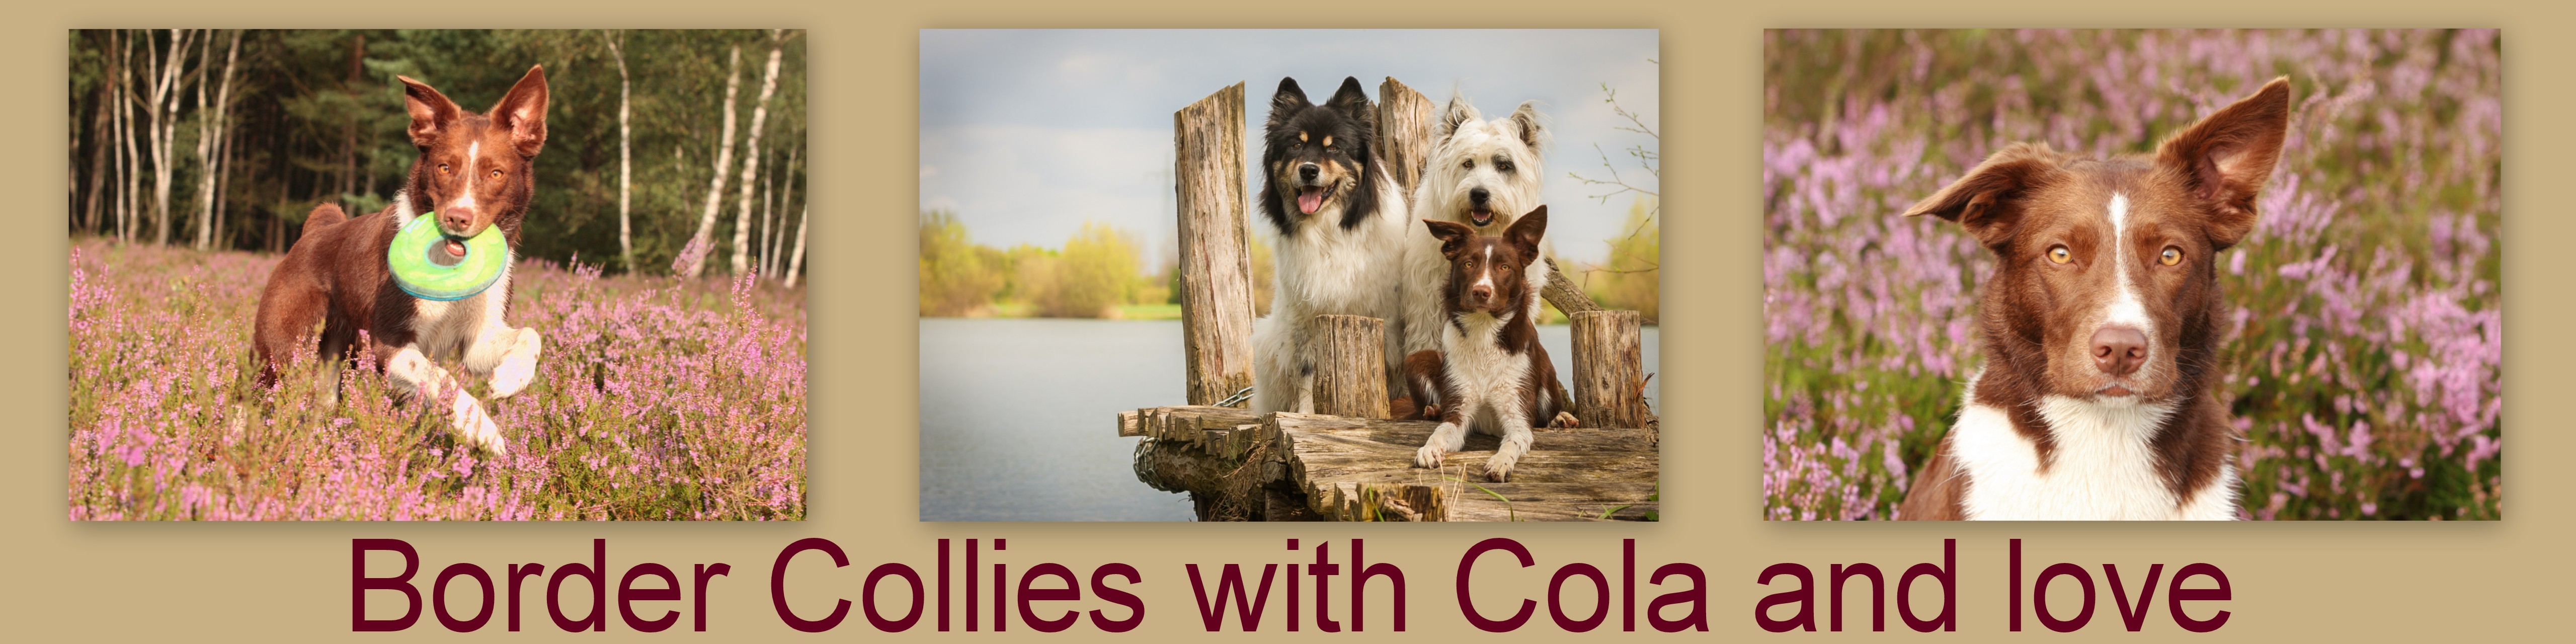 Banner Border Collies with Cola and love